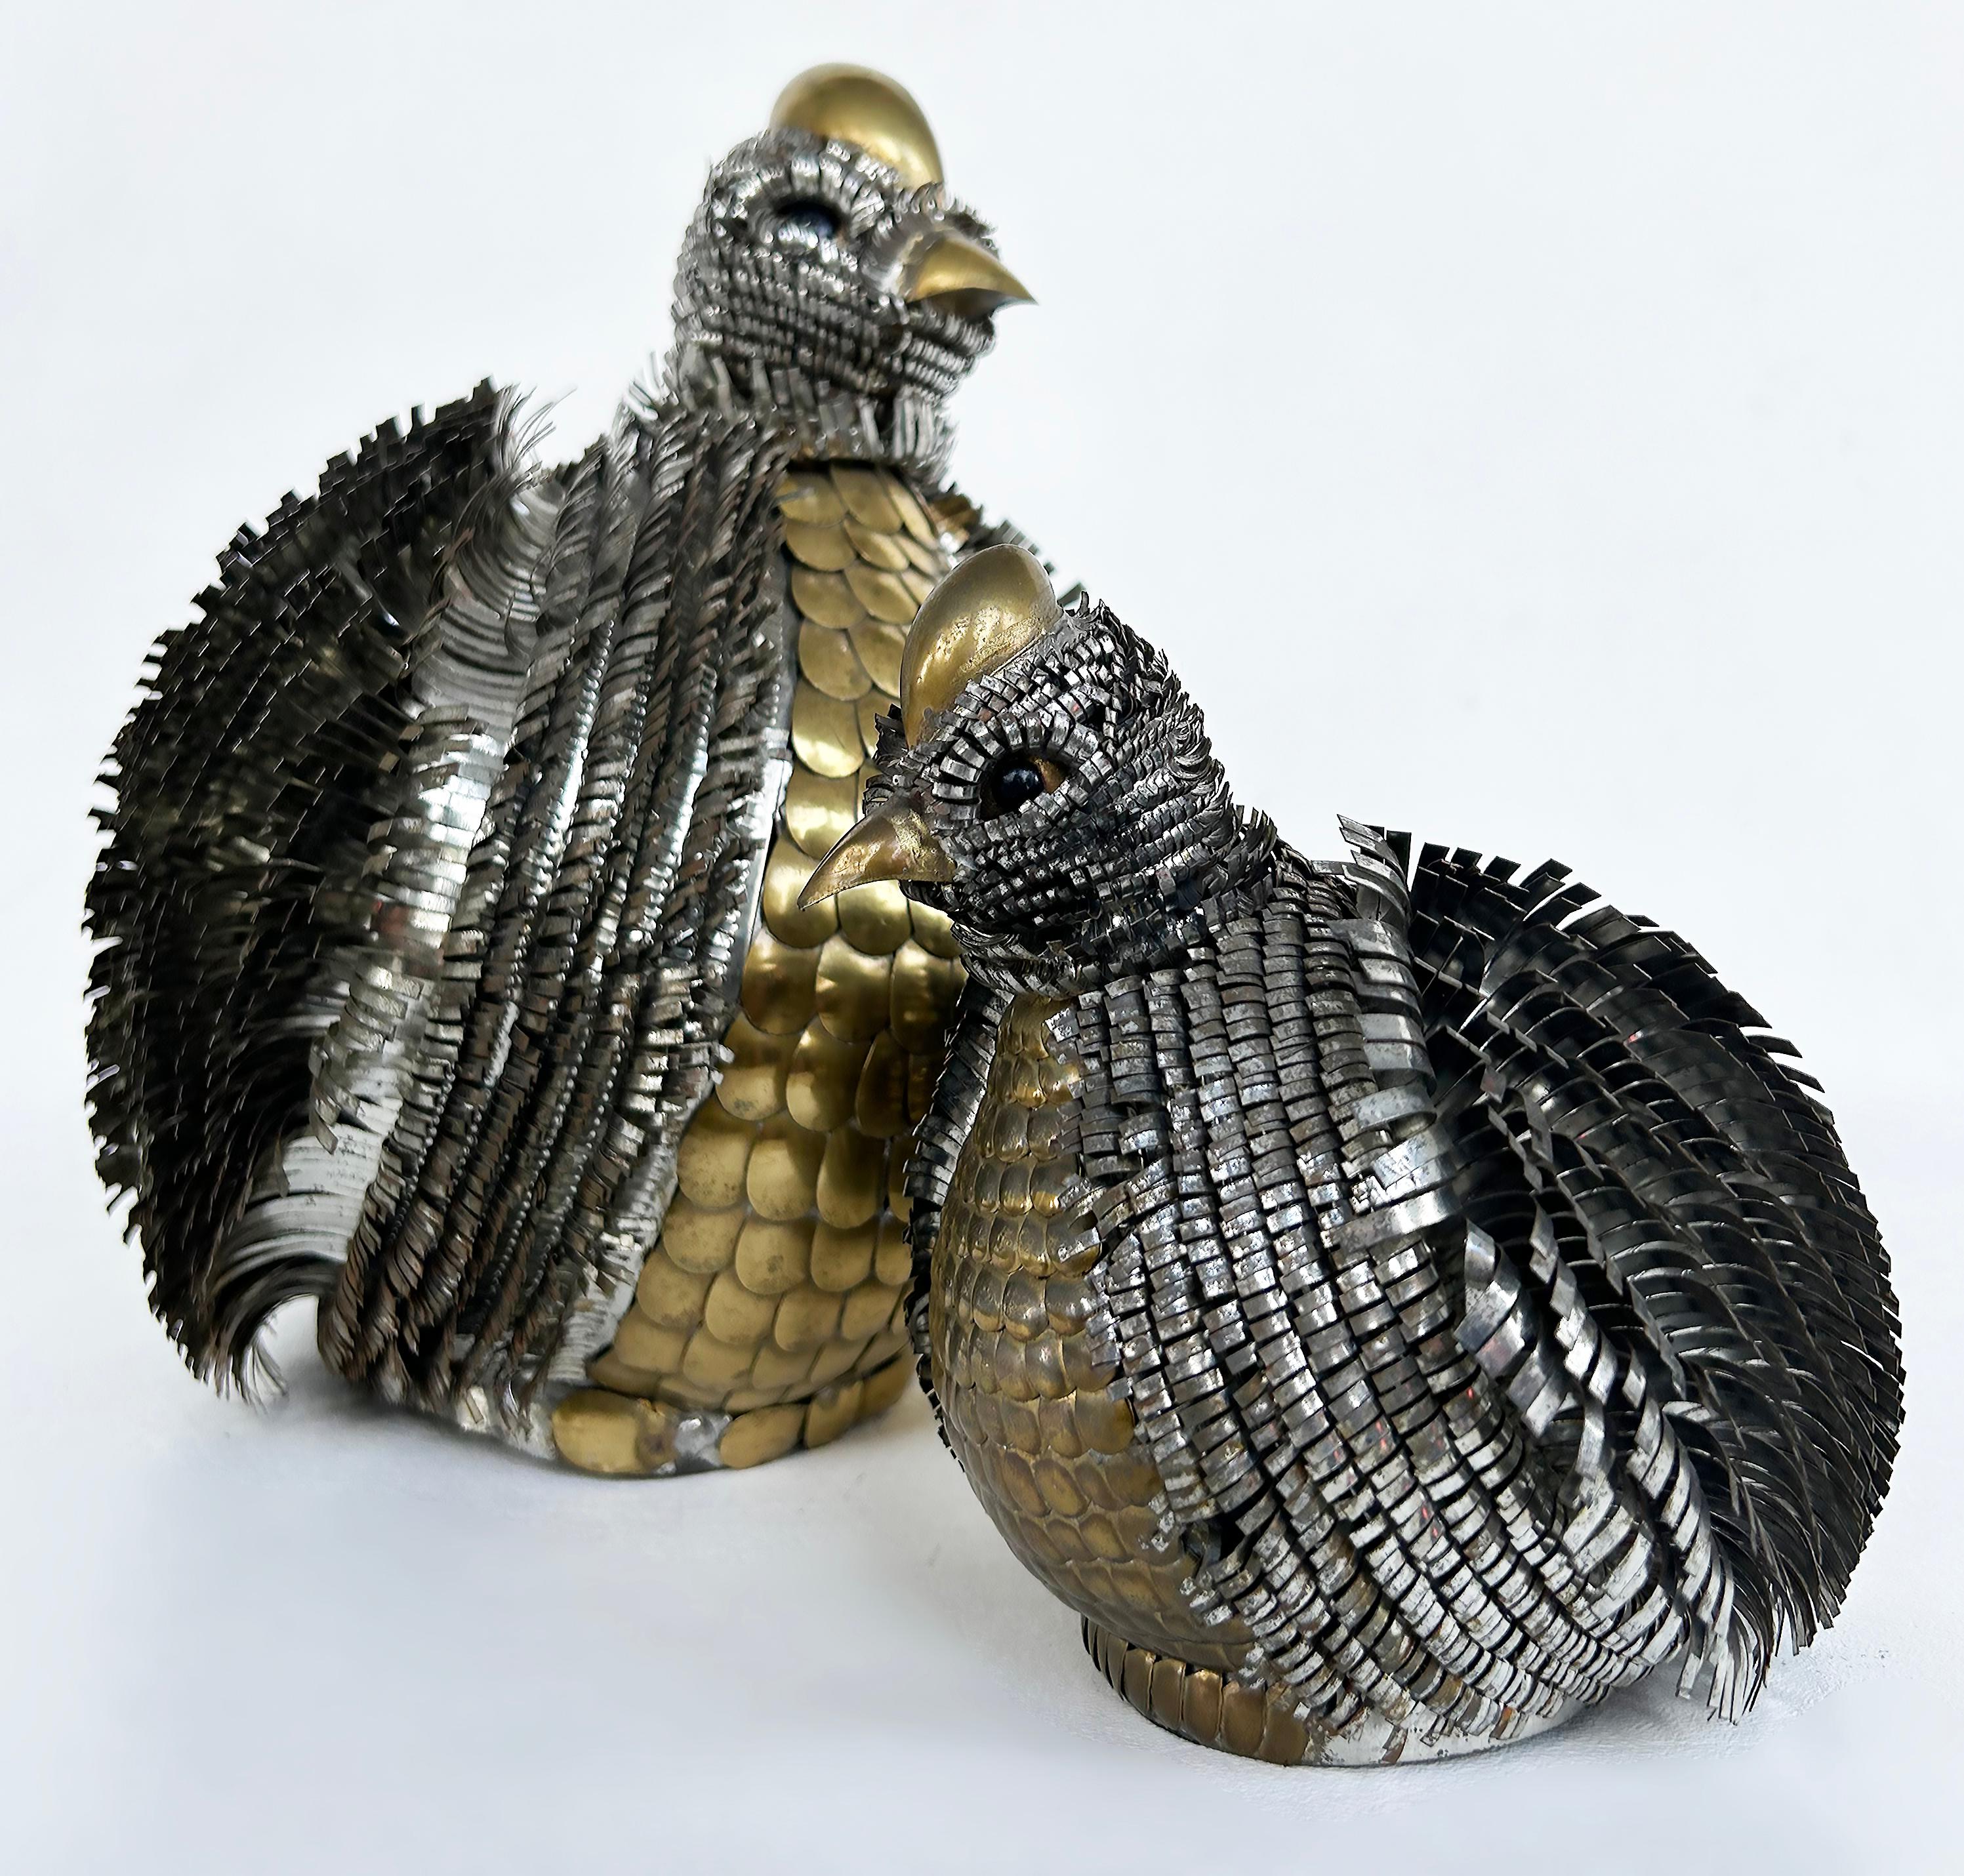 Mid-century Alexander Blazquez Bustamante Style Bird Figures in Mixed Metals 

Offered for sale is a pair of Mexican mixed metal figures of birds by Alexander Blazquez in the style of Sergio Bustamante.  These very intricate sculptures are sold as a